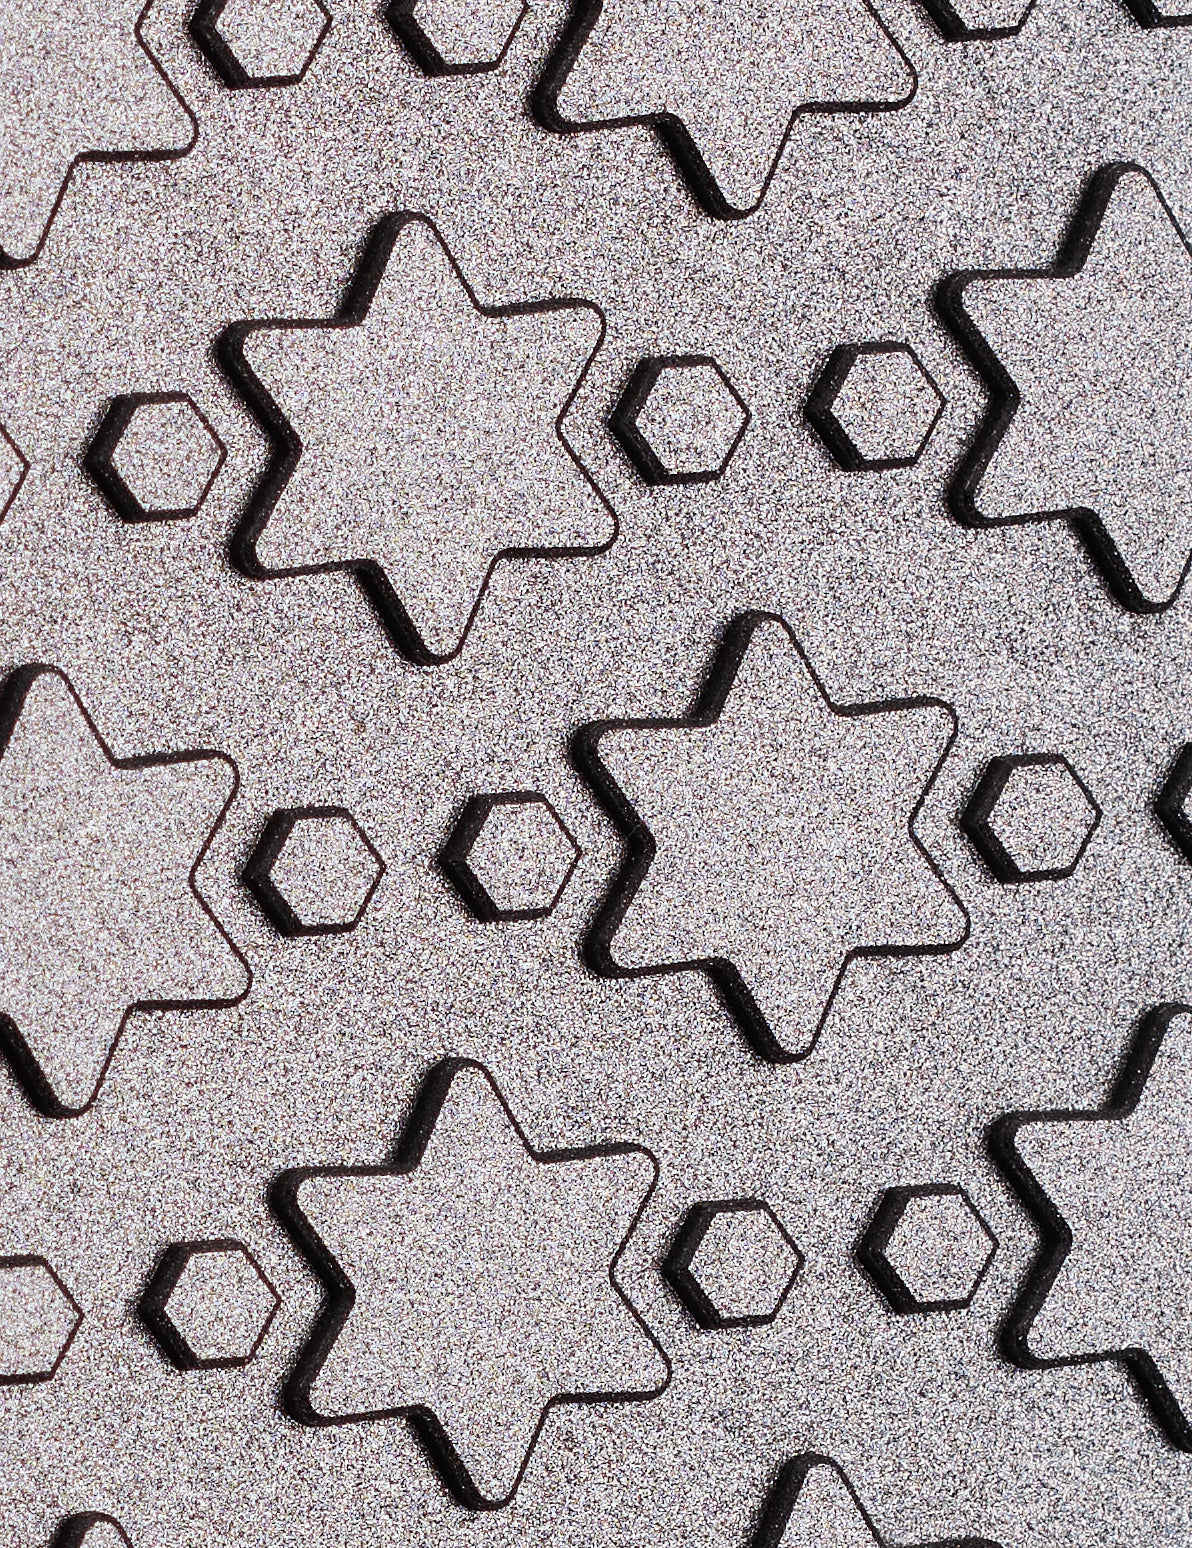 Zoomed in to reveal the diamond surface of a lapping plate with star and hexagonal pattern